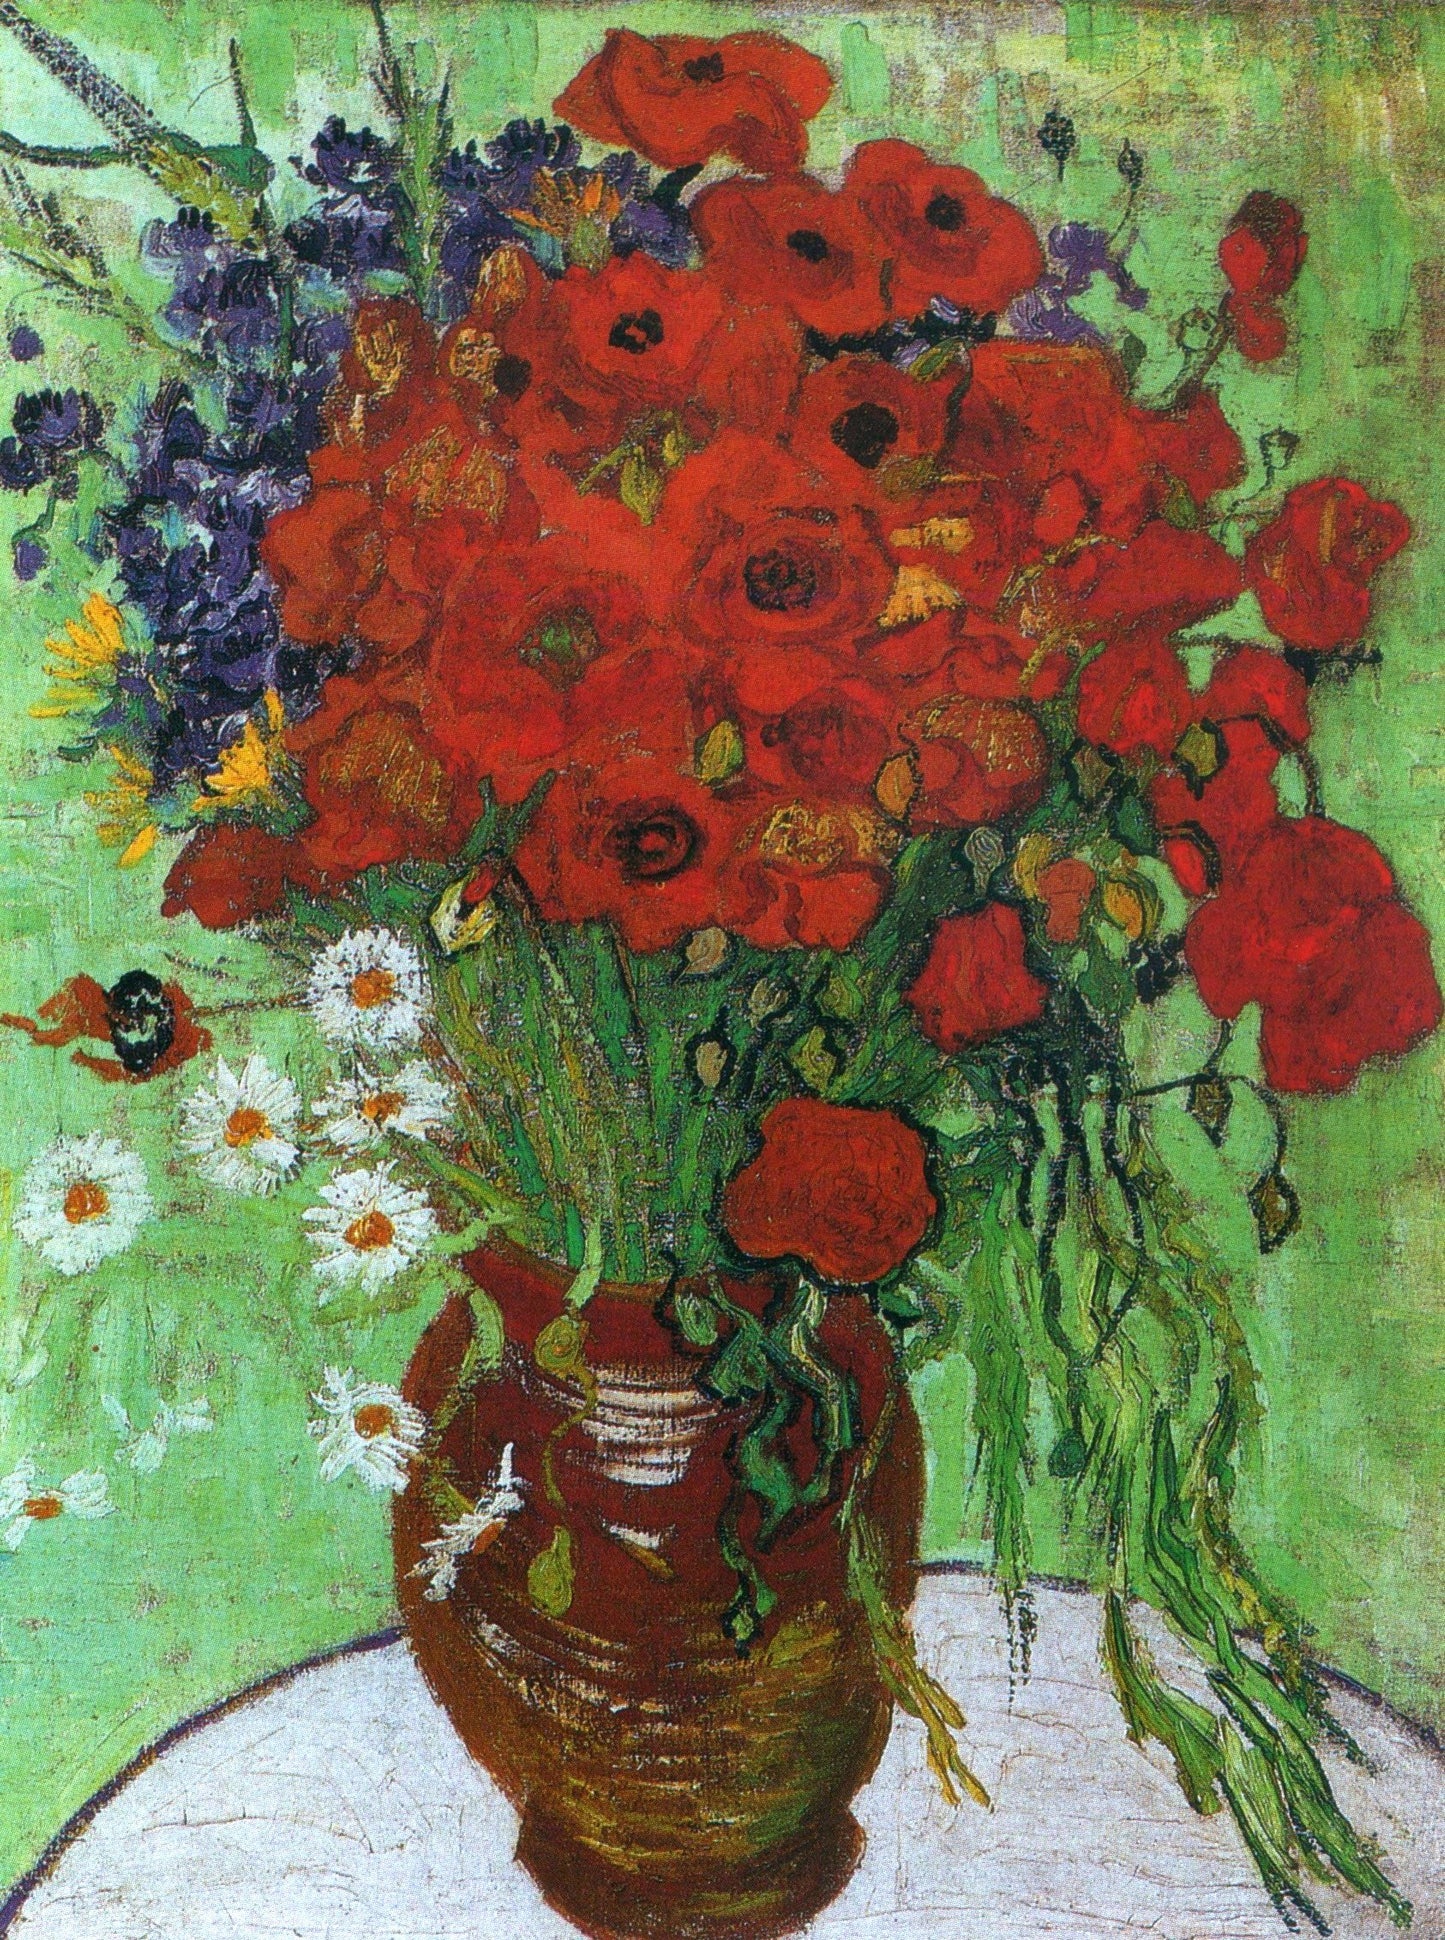 Red Poppies and Daisies, 1890